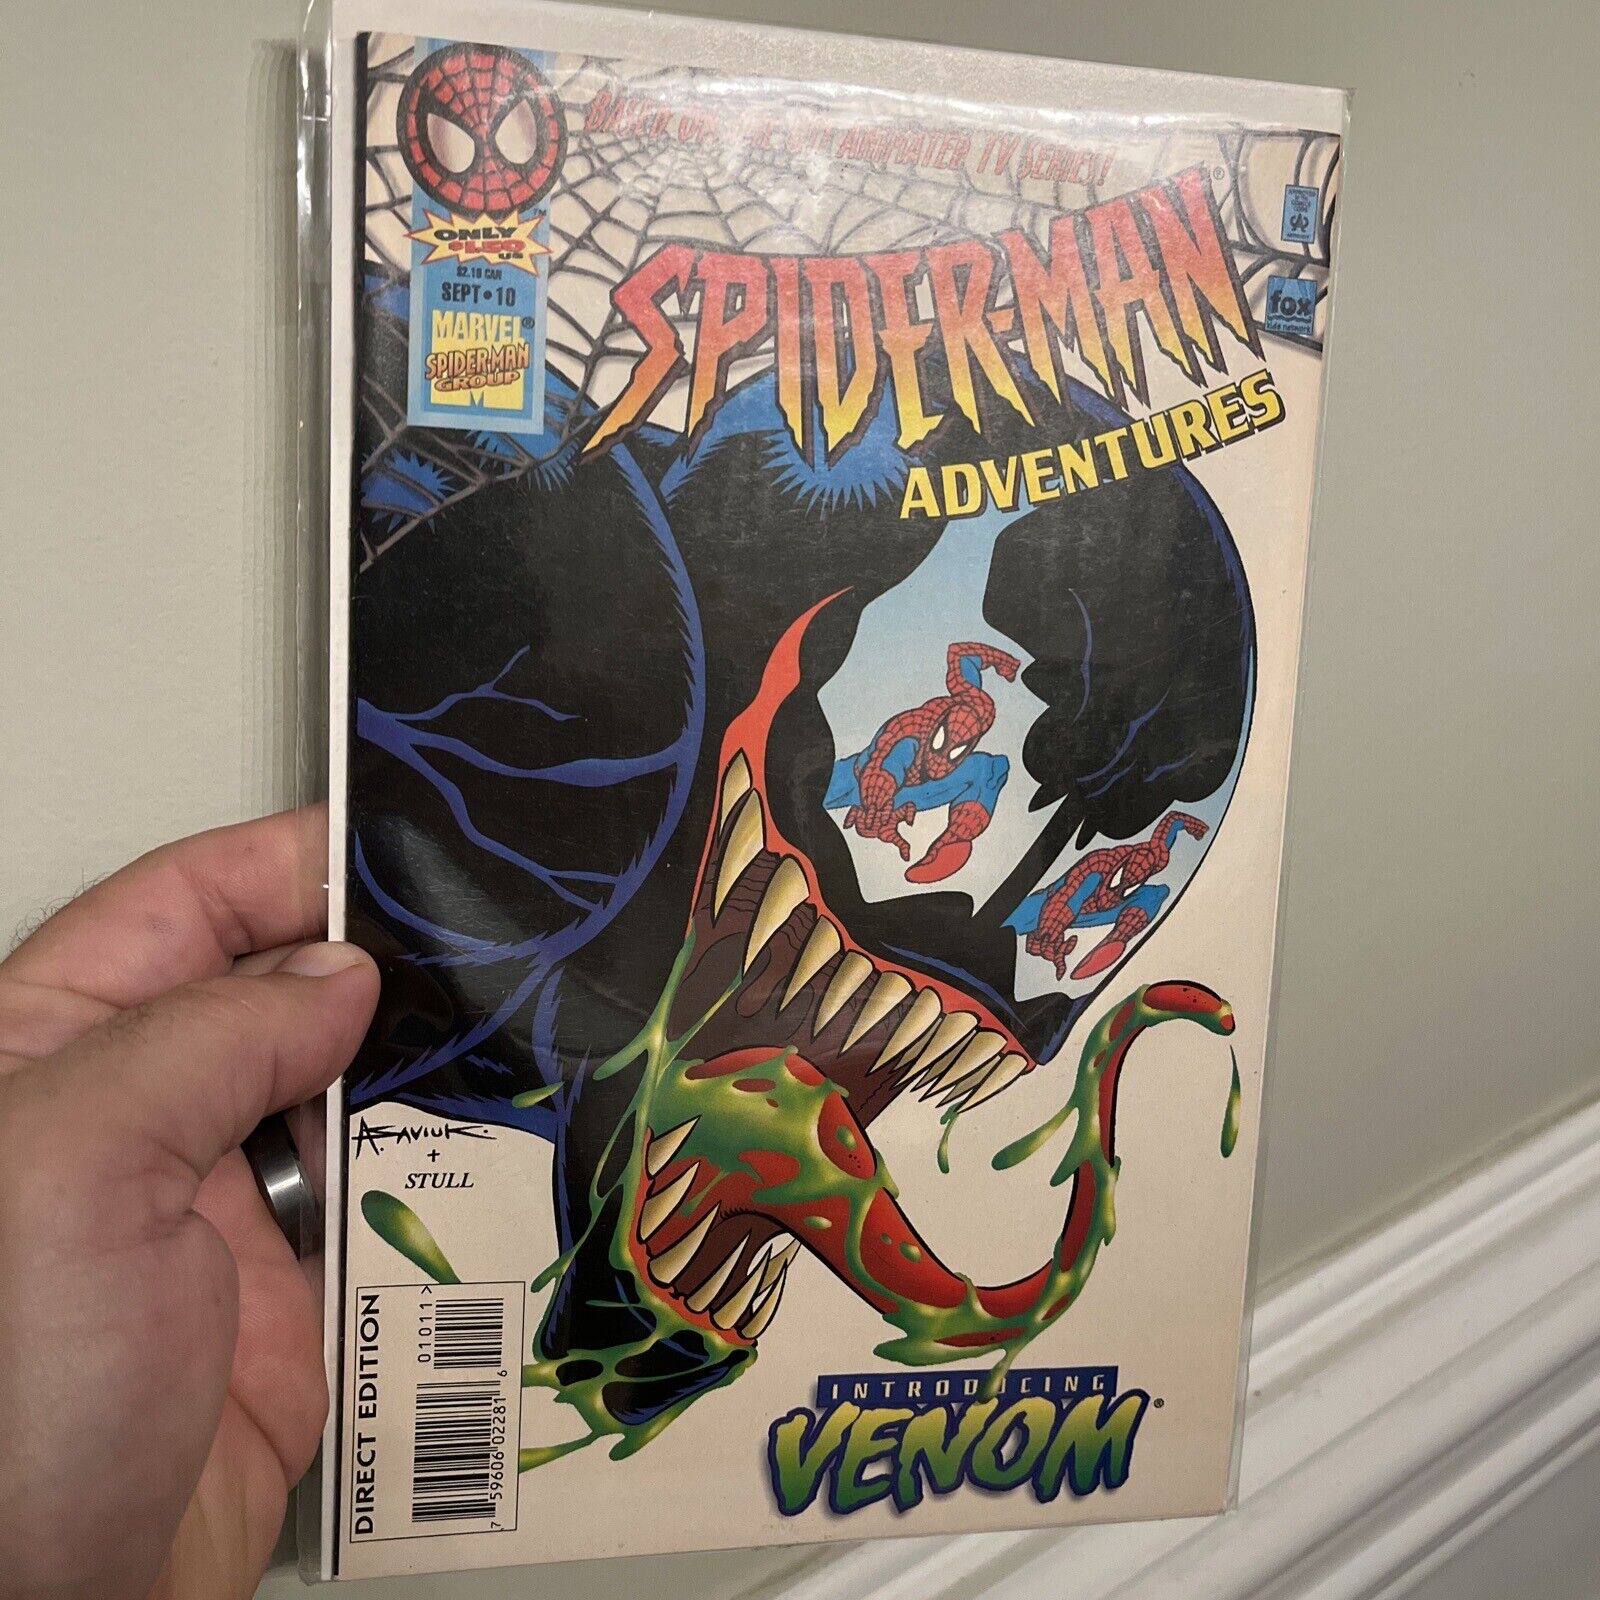 Spiderman Adventures #10 Newsstand (1st appearance of animated Venom!)